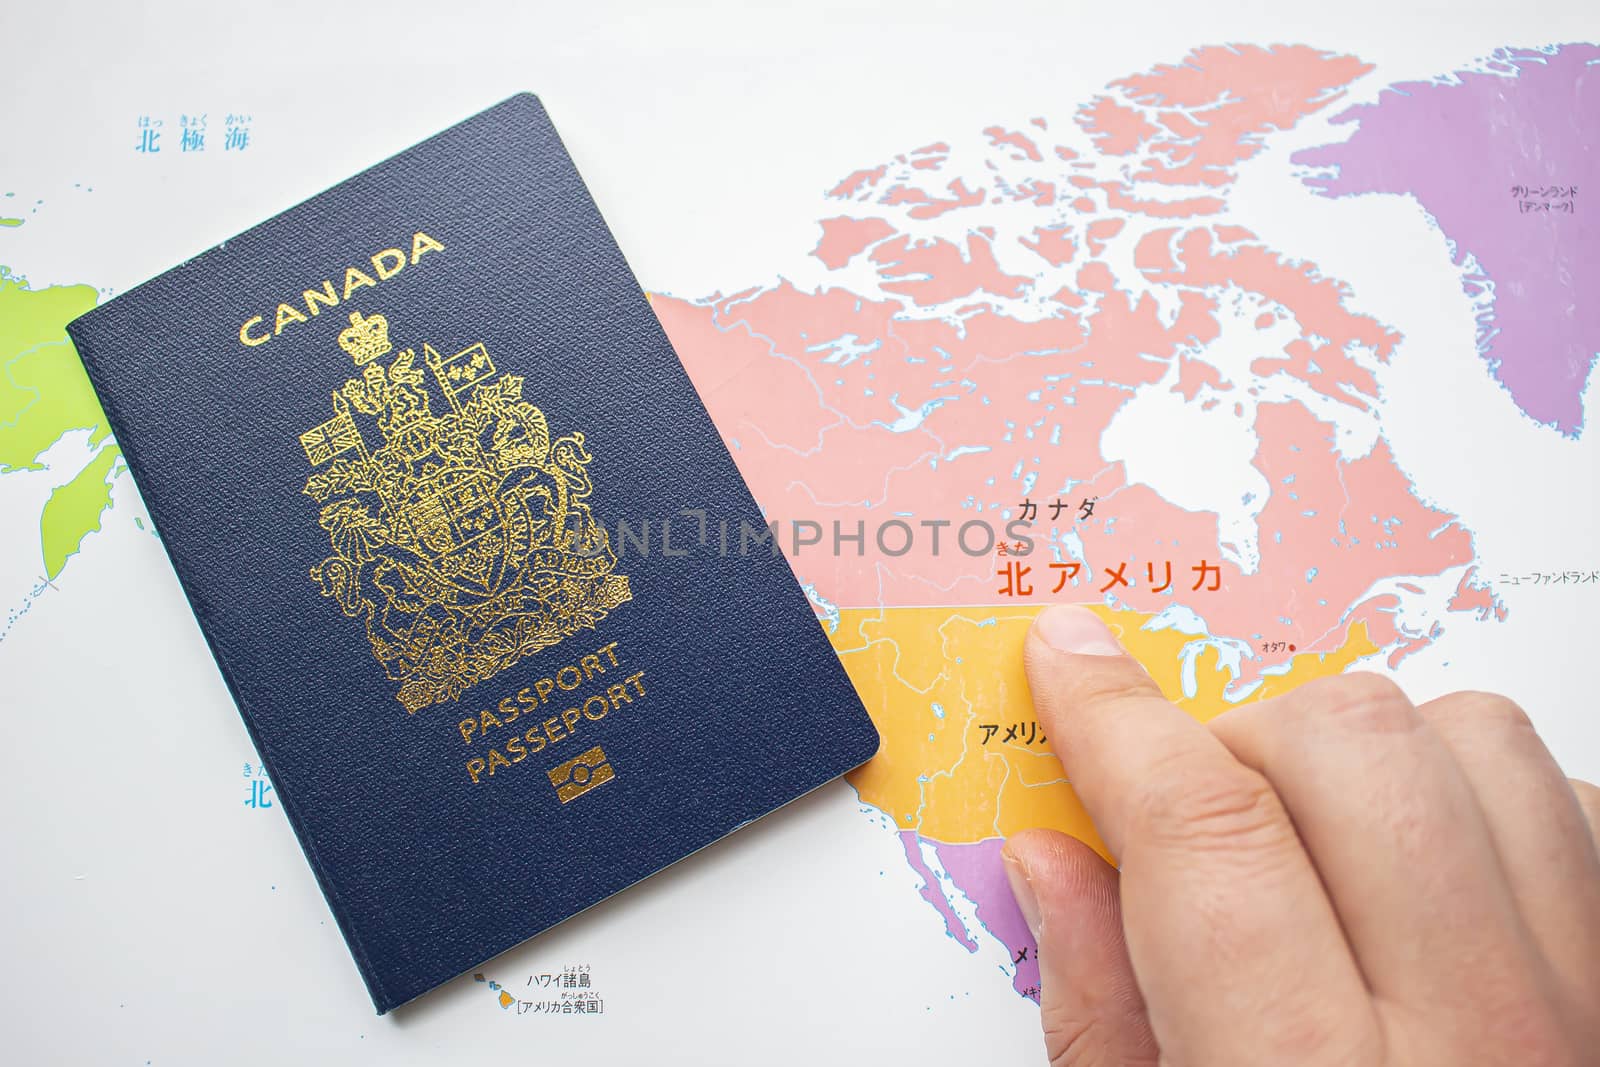 A Person's hand with a Canadian passport front cover on a map on the background